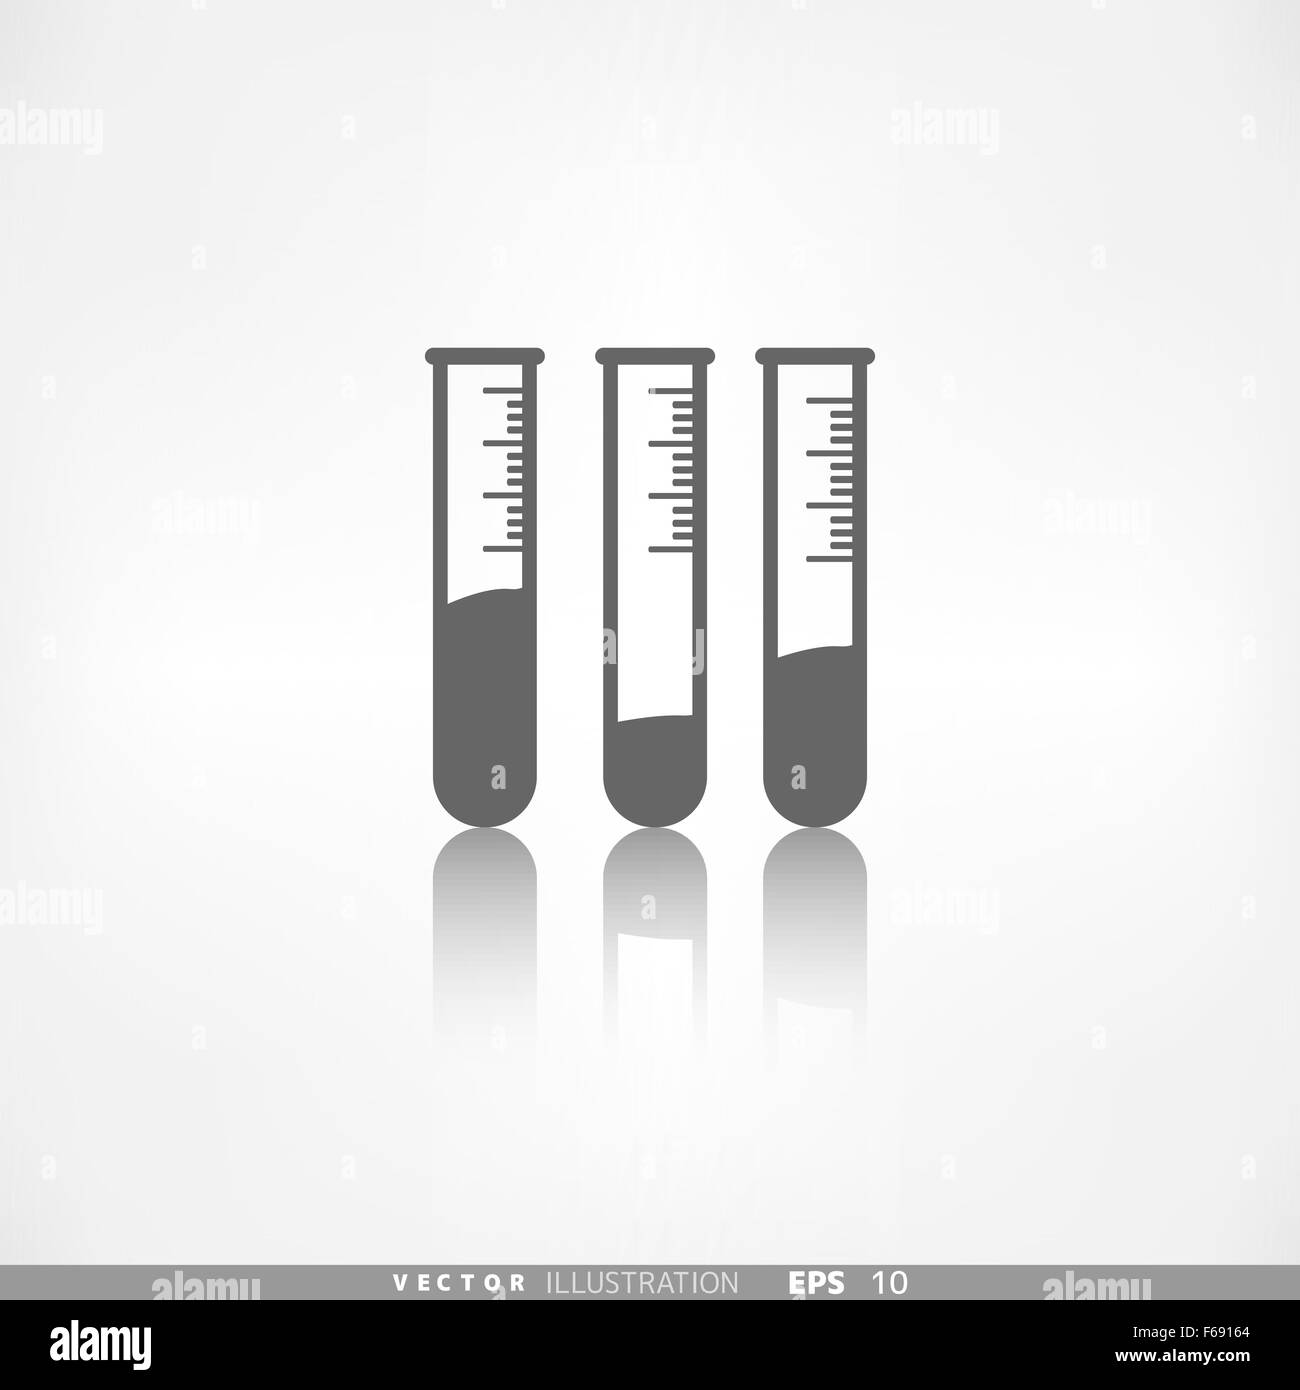 Test tube icon, microbiology equipment Stock Vector